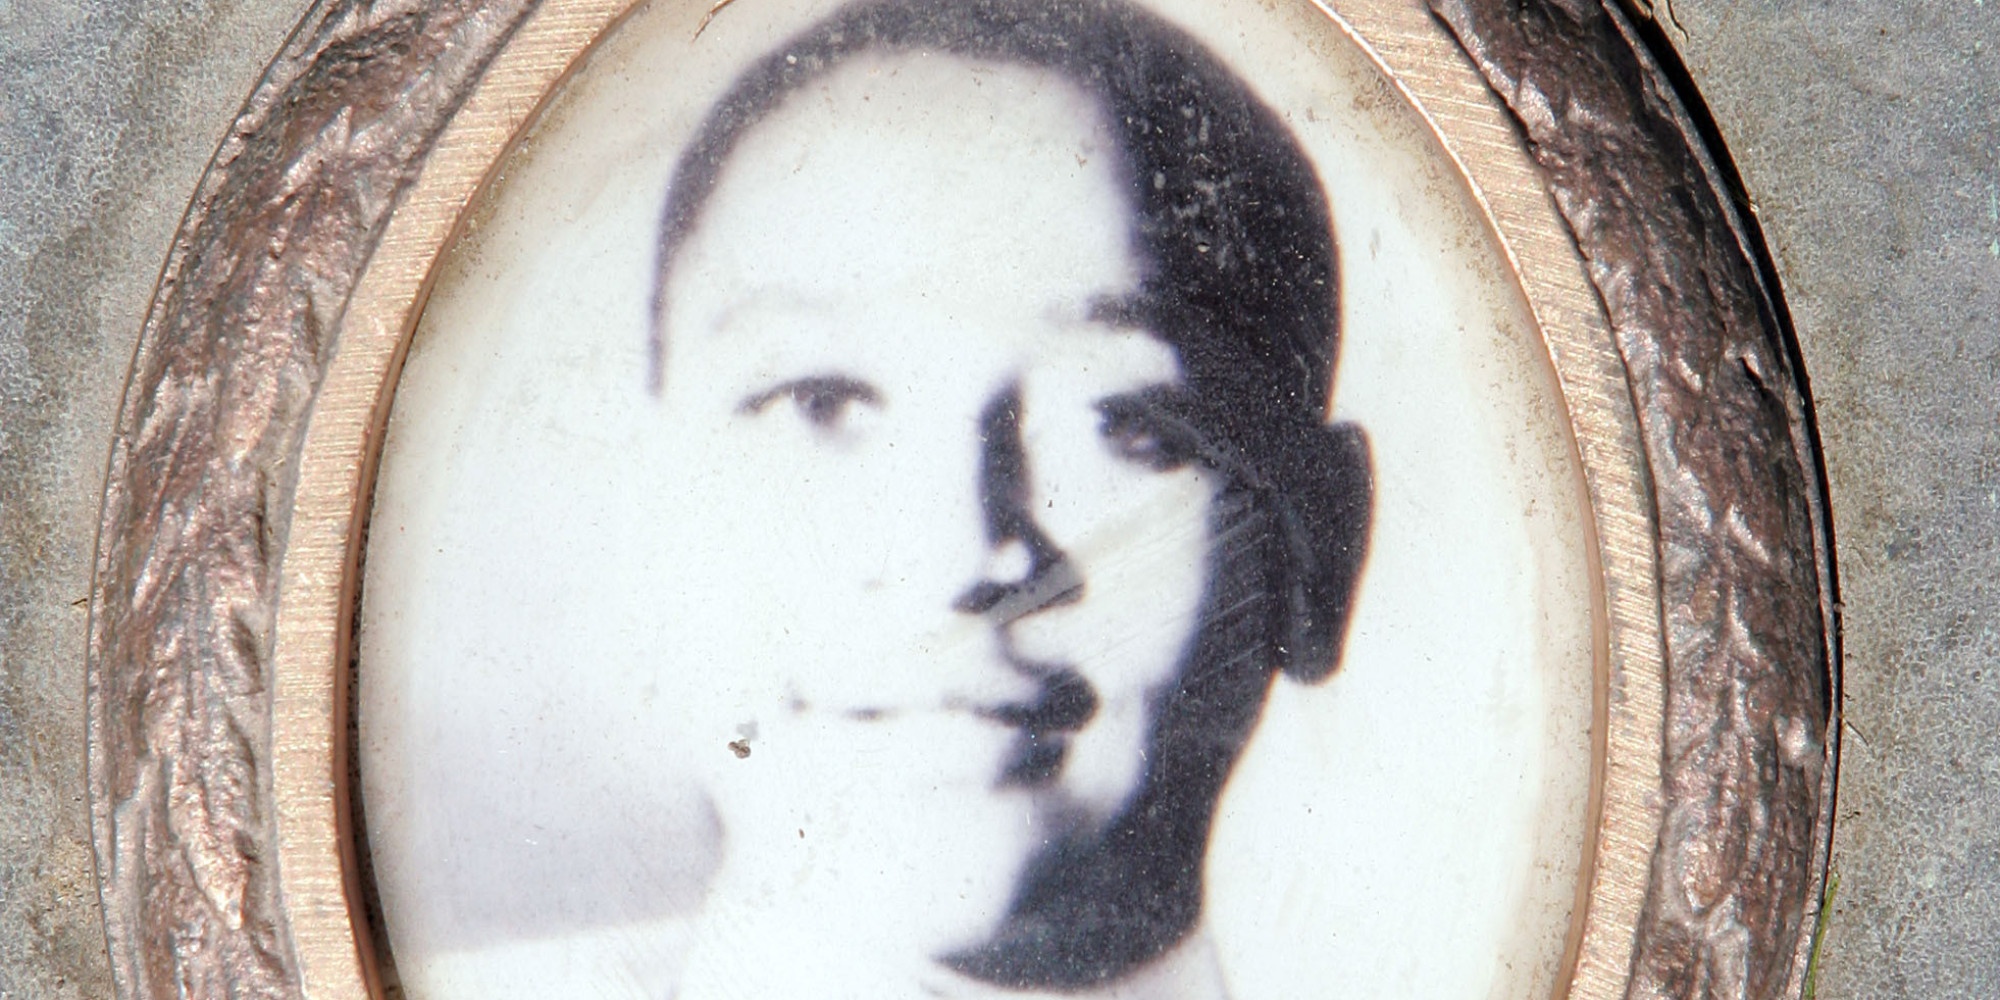 Confronting Past, Mississippi Town Erects Emmett Till